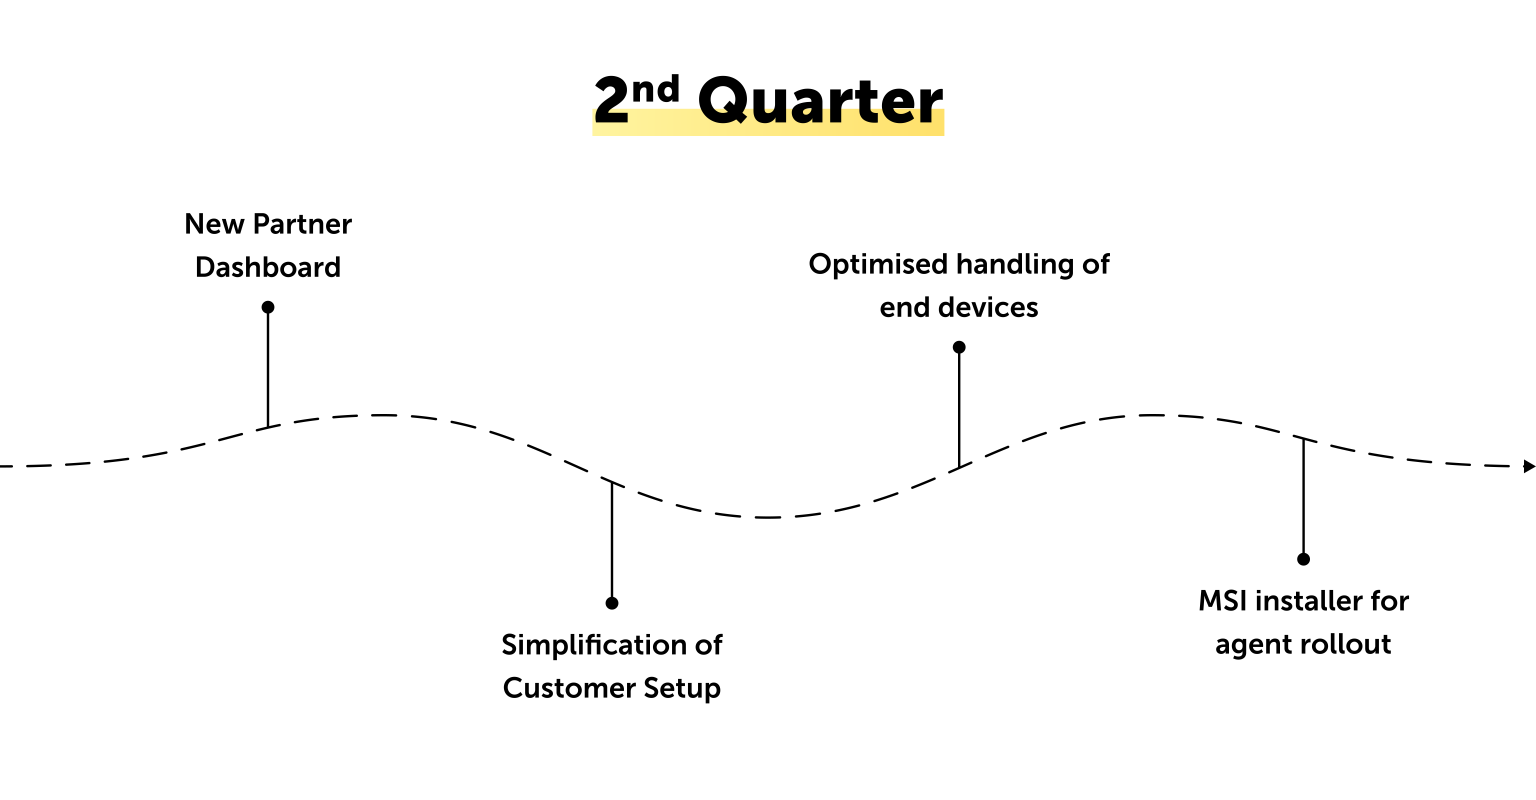 features of the 2nd quarter